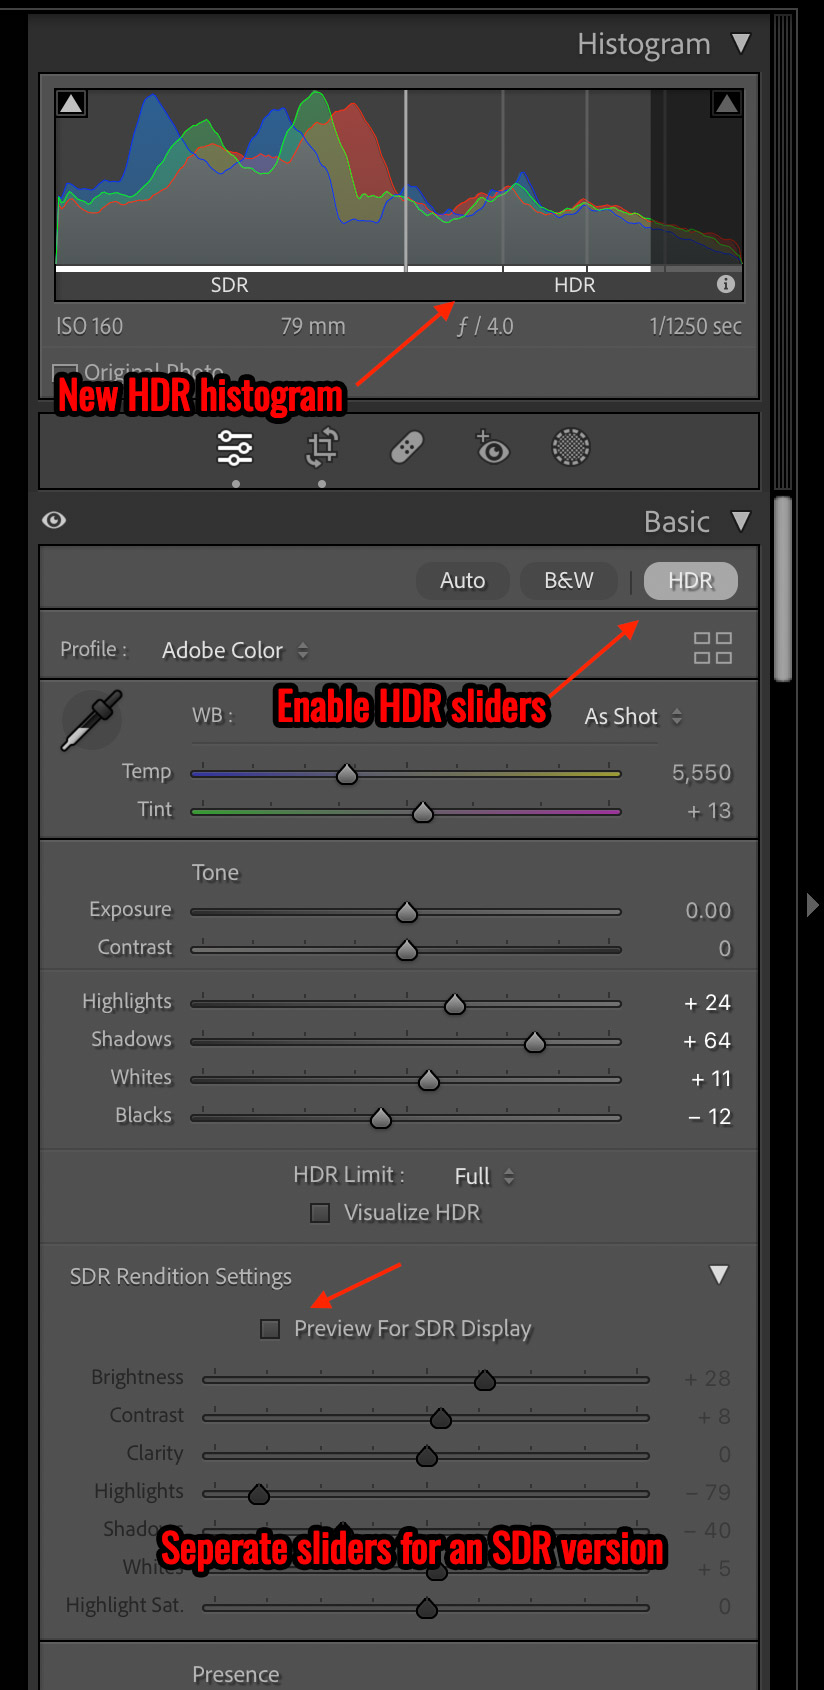 A screenshot of Adobe's new HDR histogram and sliders